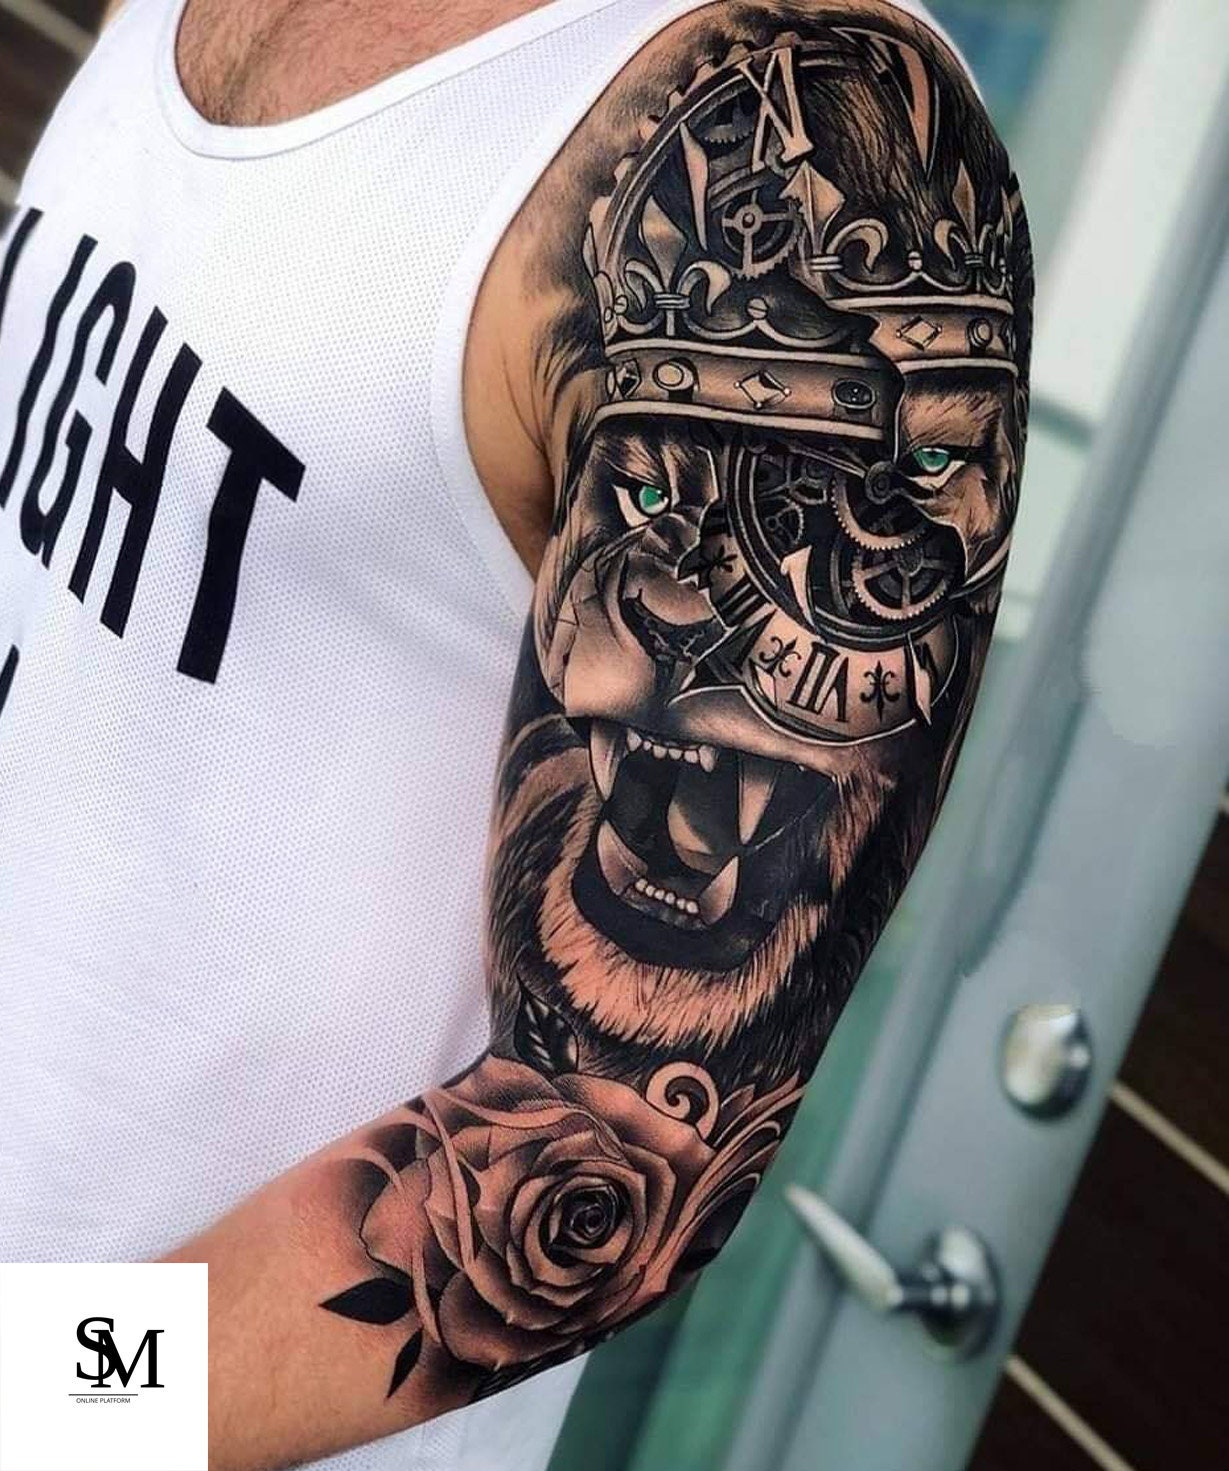 60 Cool Half Sleeve Tattoo Ideas for Men in 2023